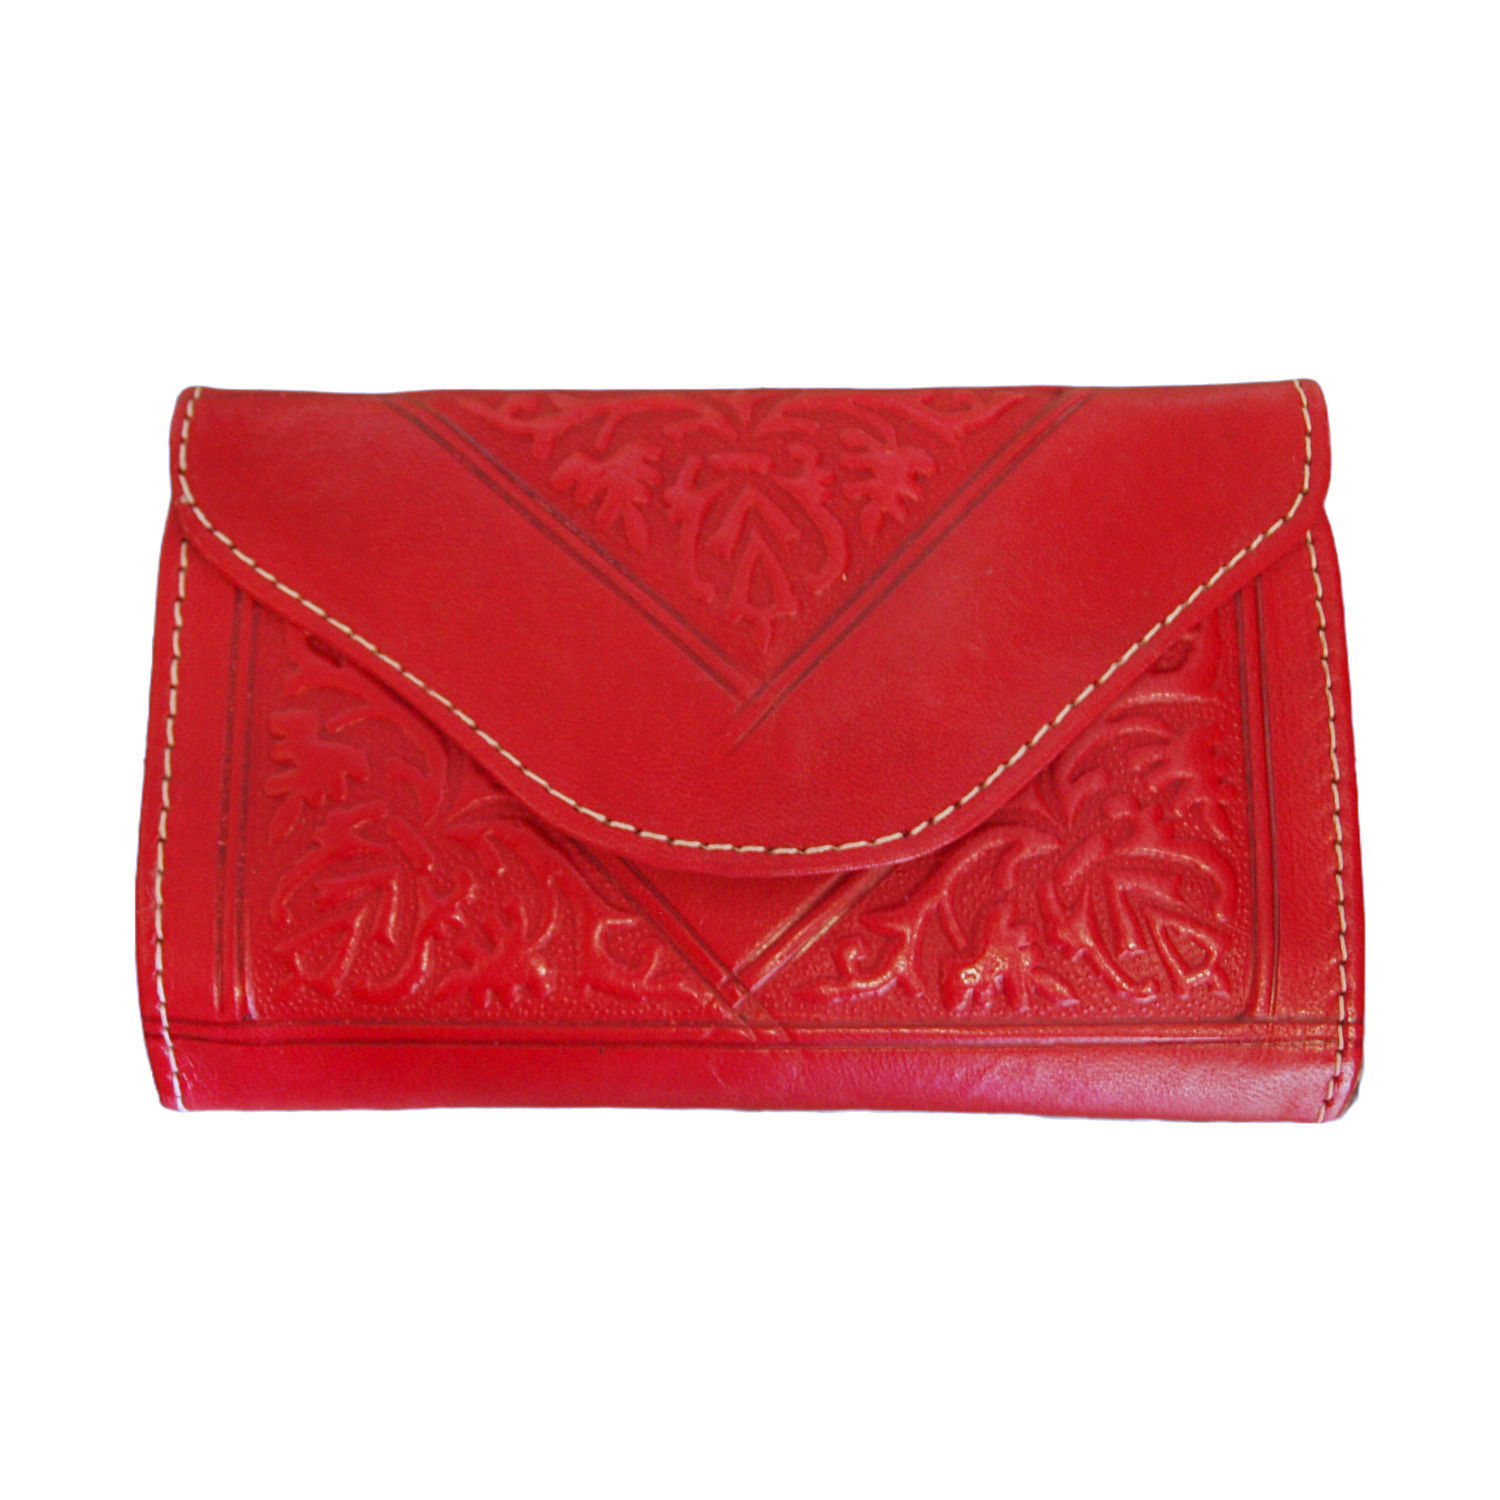 Small Leather Tri-Fold Purse Red on White Background